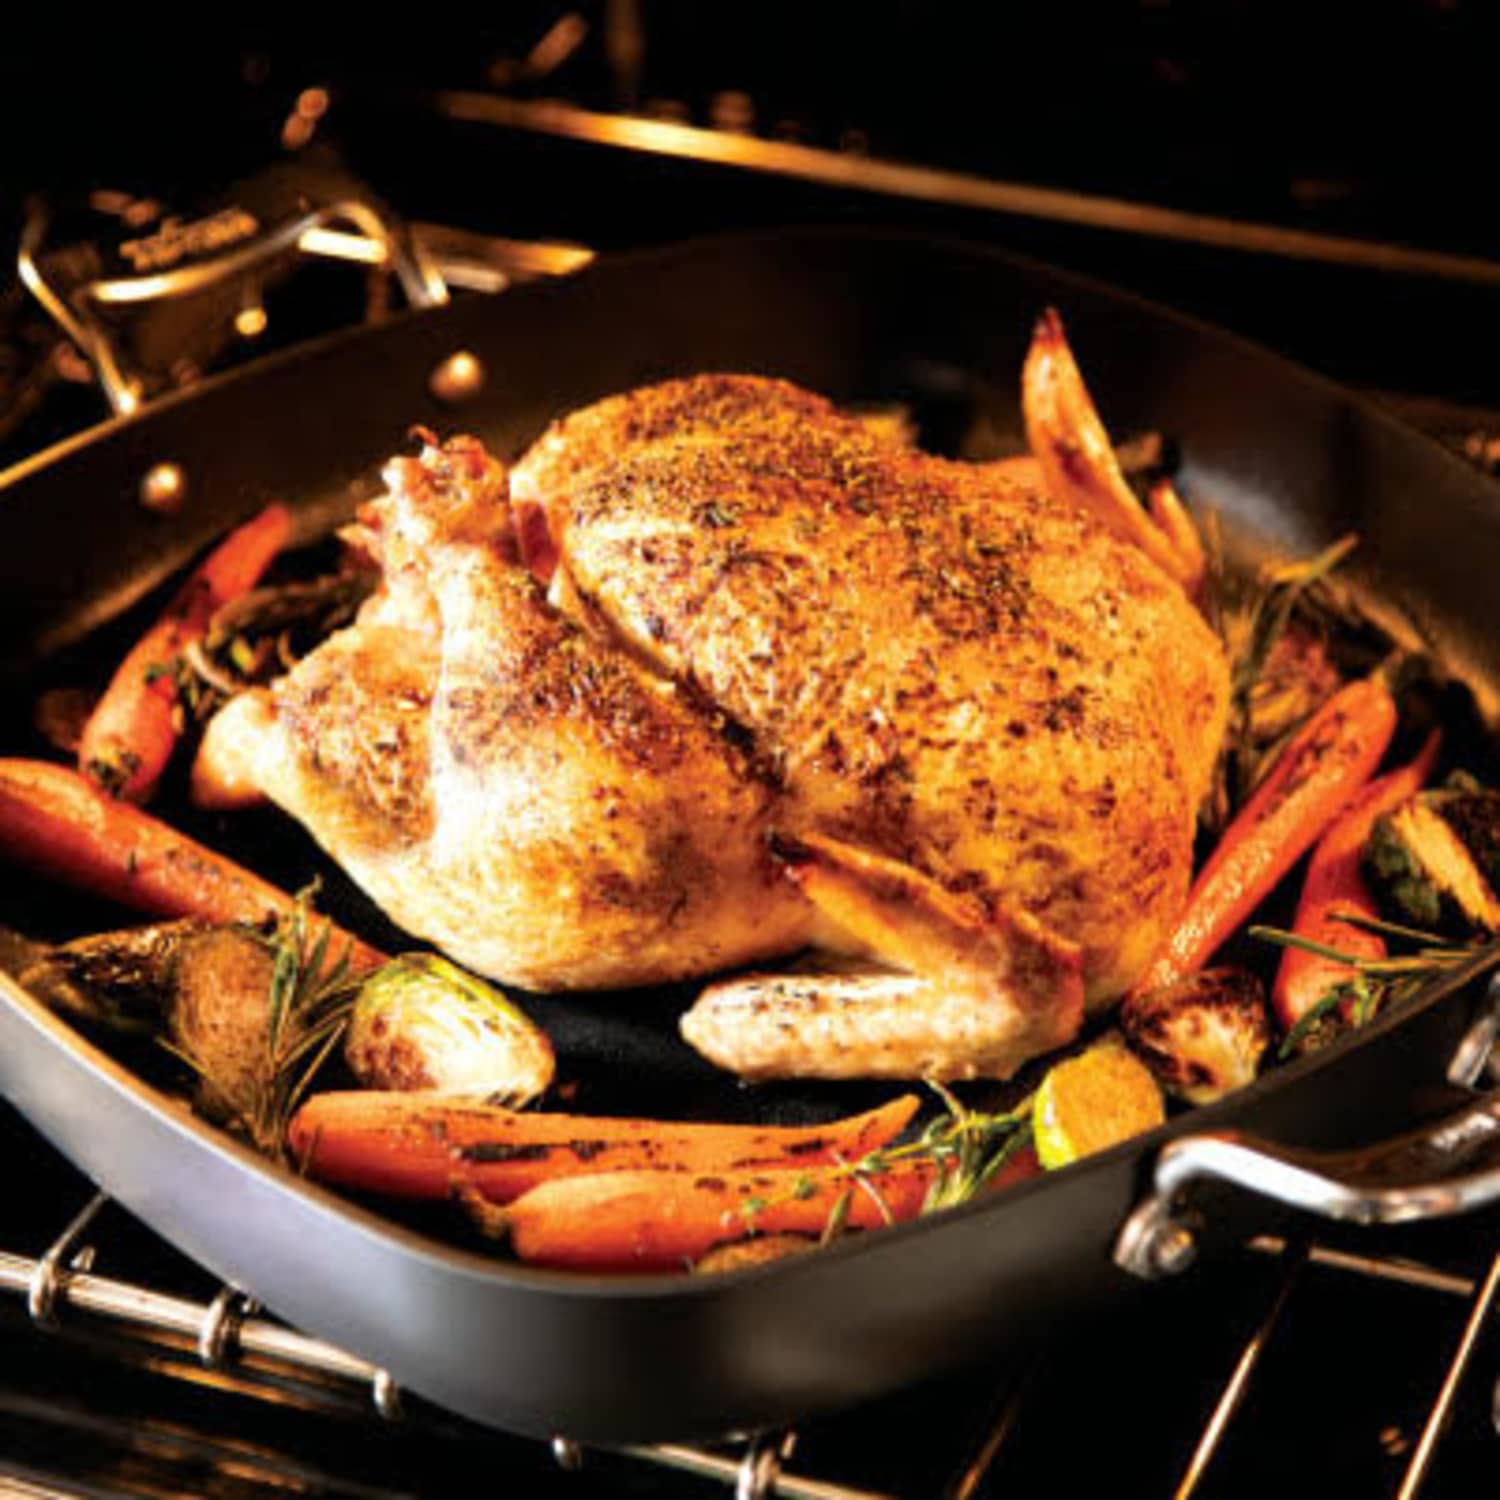 https://cdn.apartmenttherapy.info/image/upload/f_jpg,q_auto:eco,c_fill,g_auto,w_1500,ar_1:1/k%2Fall_clad_for_macys_pan_in_oven